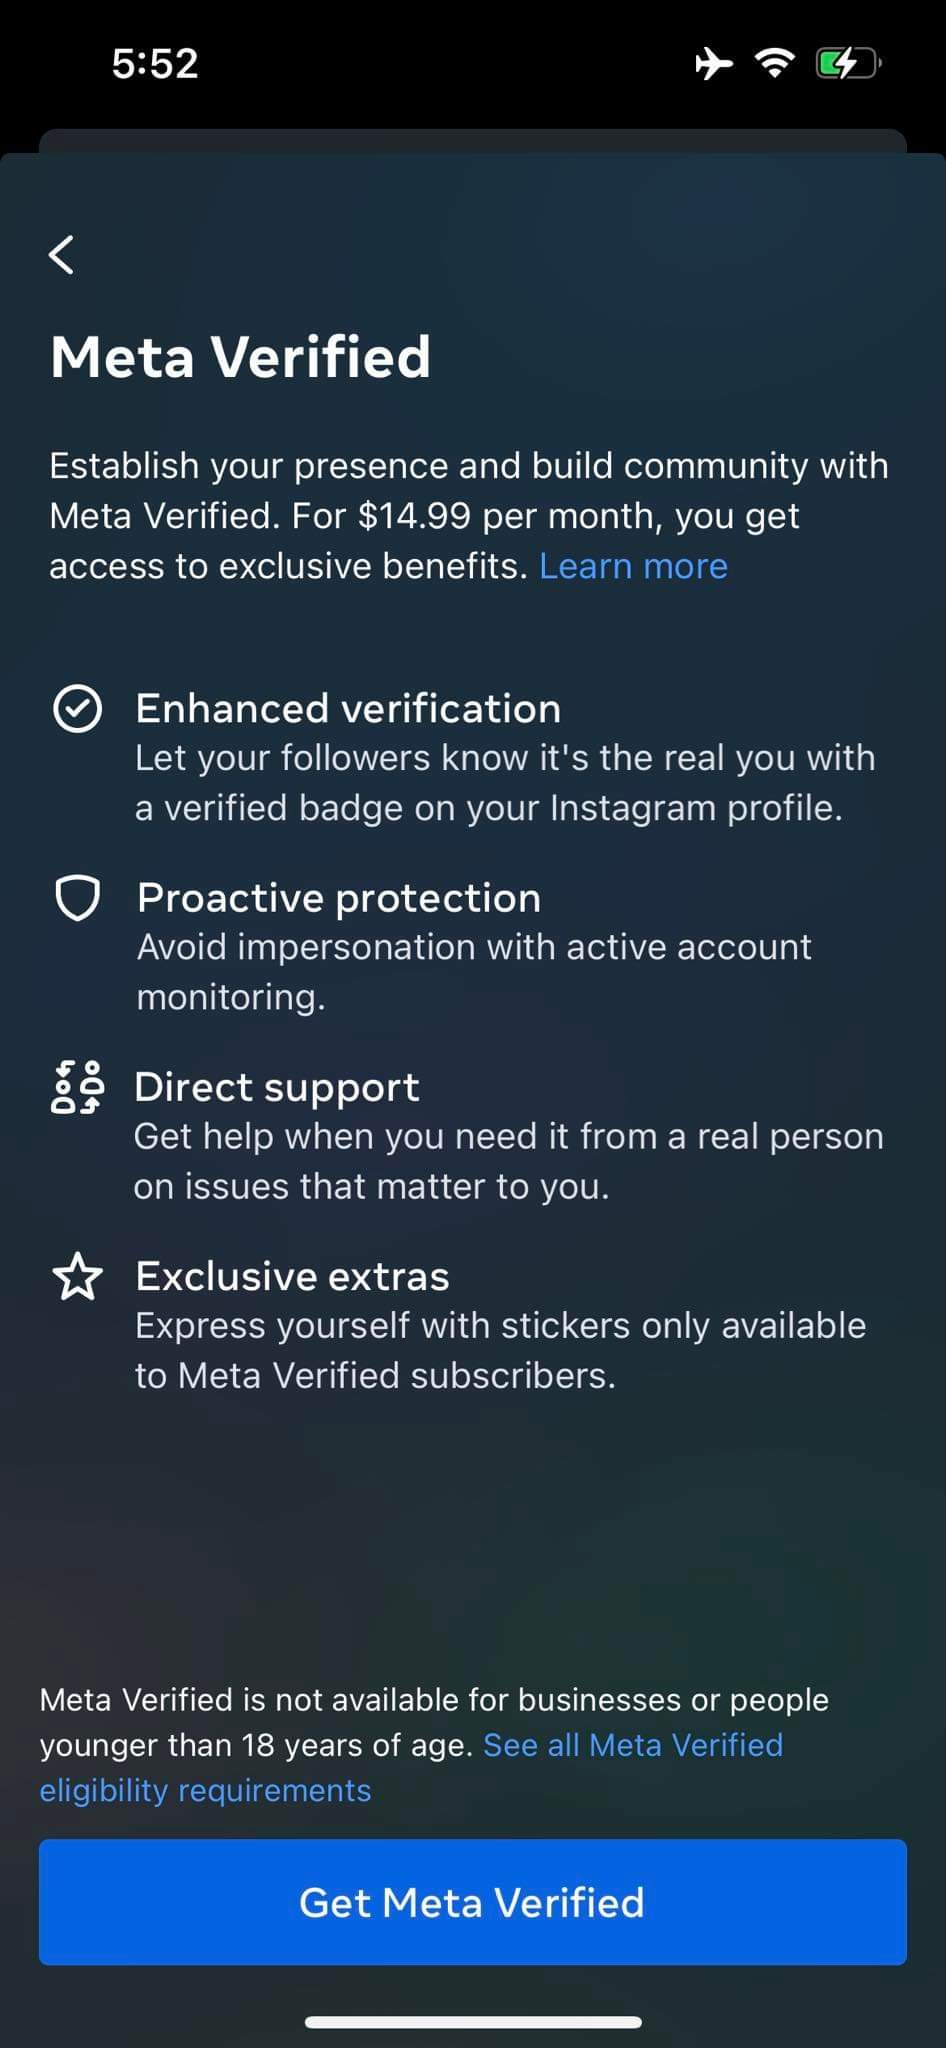 Meta Verified Accounts  Get verified on FB/IG instantly - Meta  Subscriptions Verification - Buy & Sell Facebook Fanpages - SWAPD